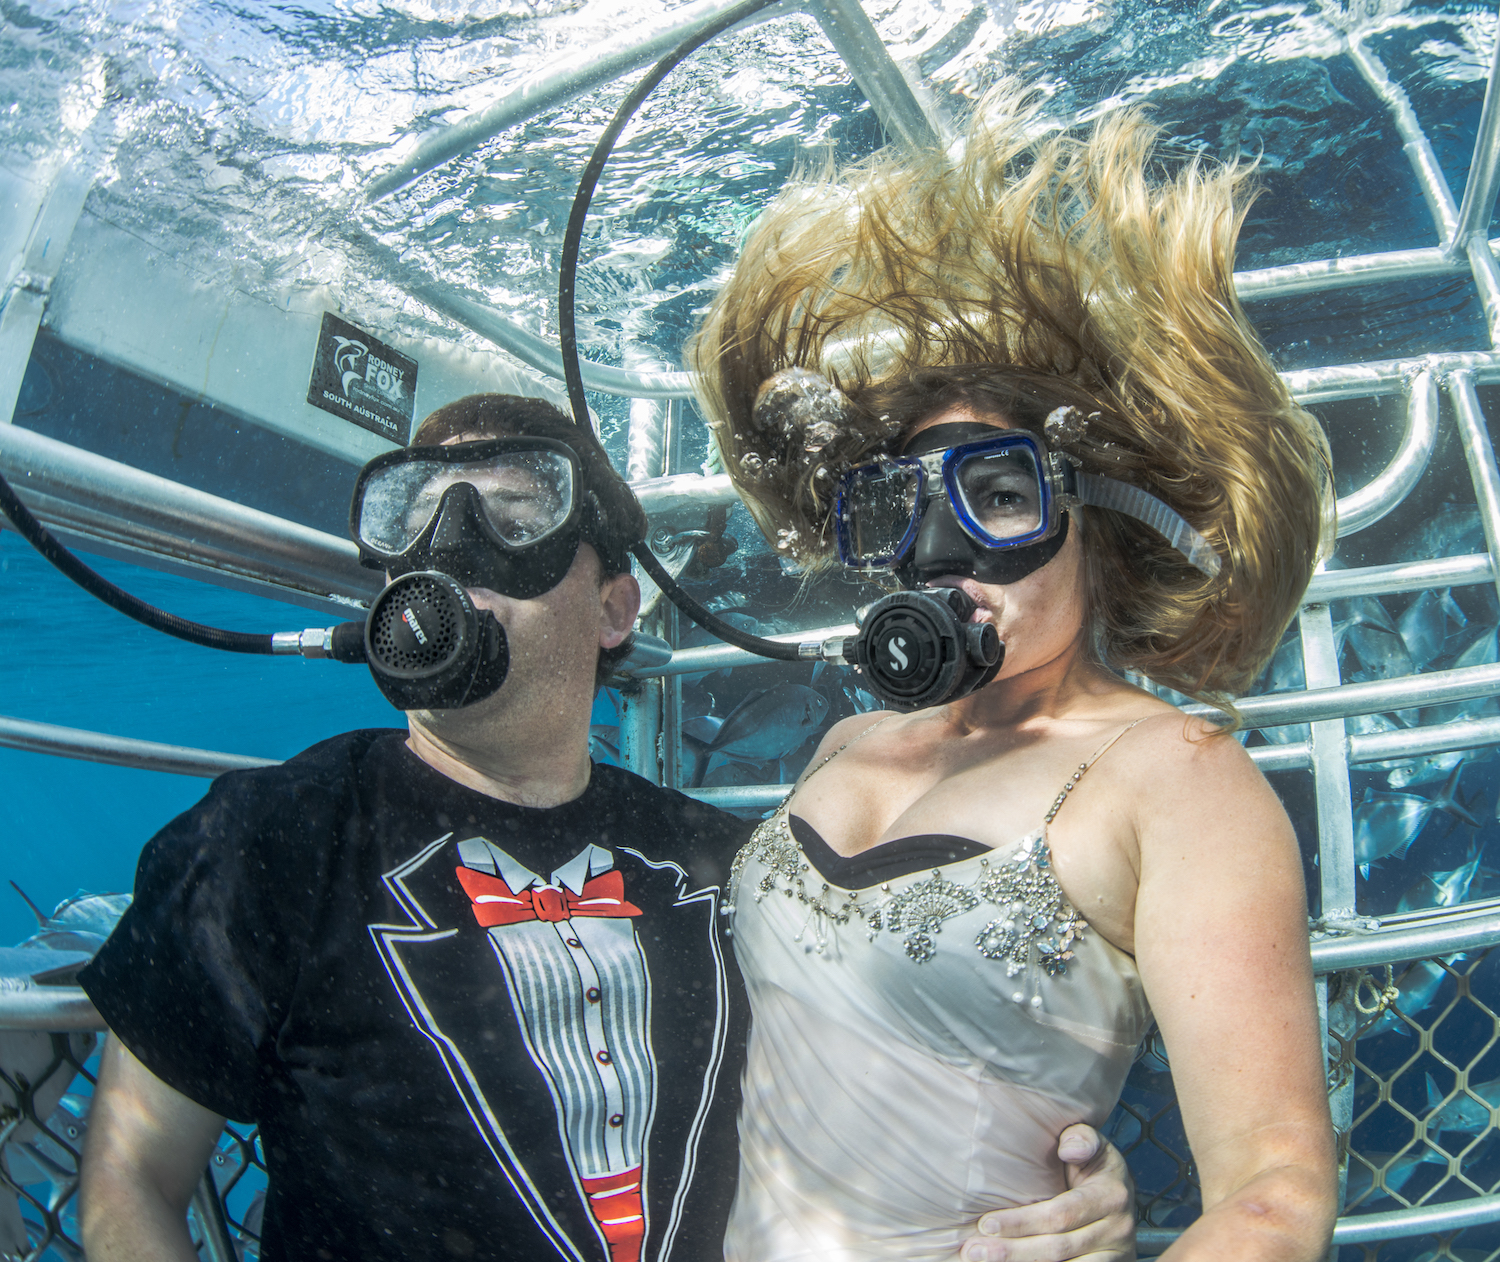 "Chris and I met on the shark dive boat where Chris was working (I was on assignment for National Geographic), and so that's where we decided to honeymoon (with a few of our diving friends). We decided to do a mock wedding shoot in the cage just for fun." Photo: Andrew Fox